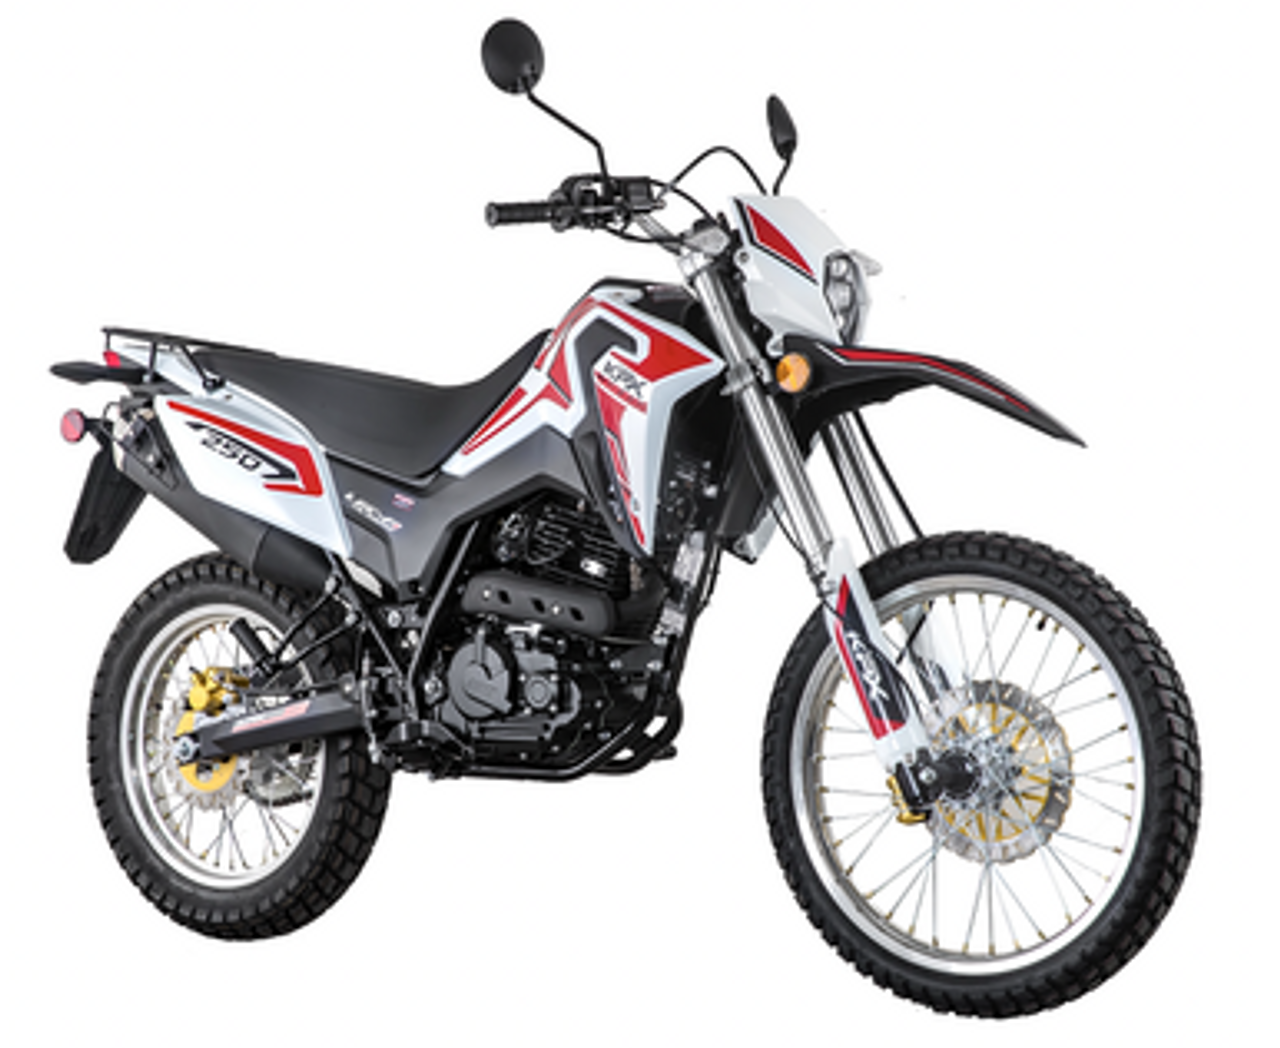 lifan dirt motocross used – Search for your used motorcycle on the